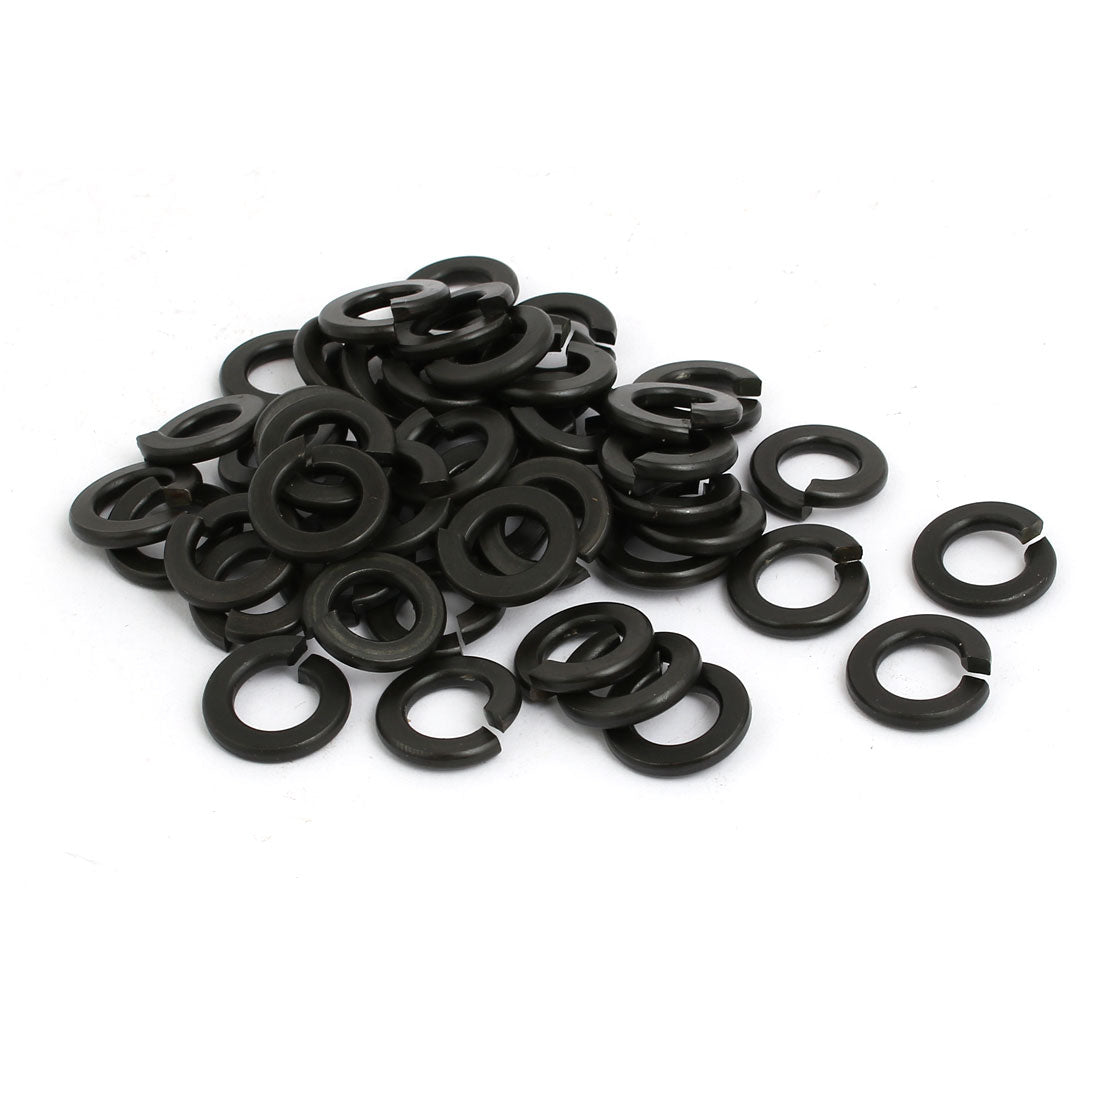 uxcell Uxcell 50pcs 3/8-inch Inner Dia Carbon Steel Split Lock Spring Washer Gasket Black